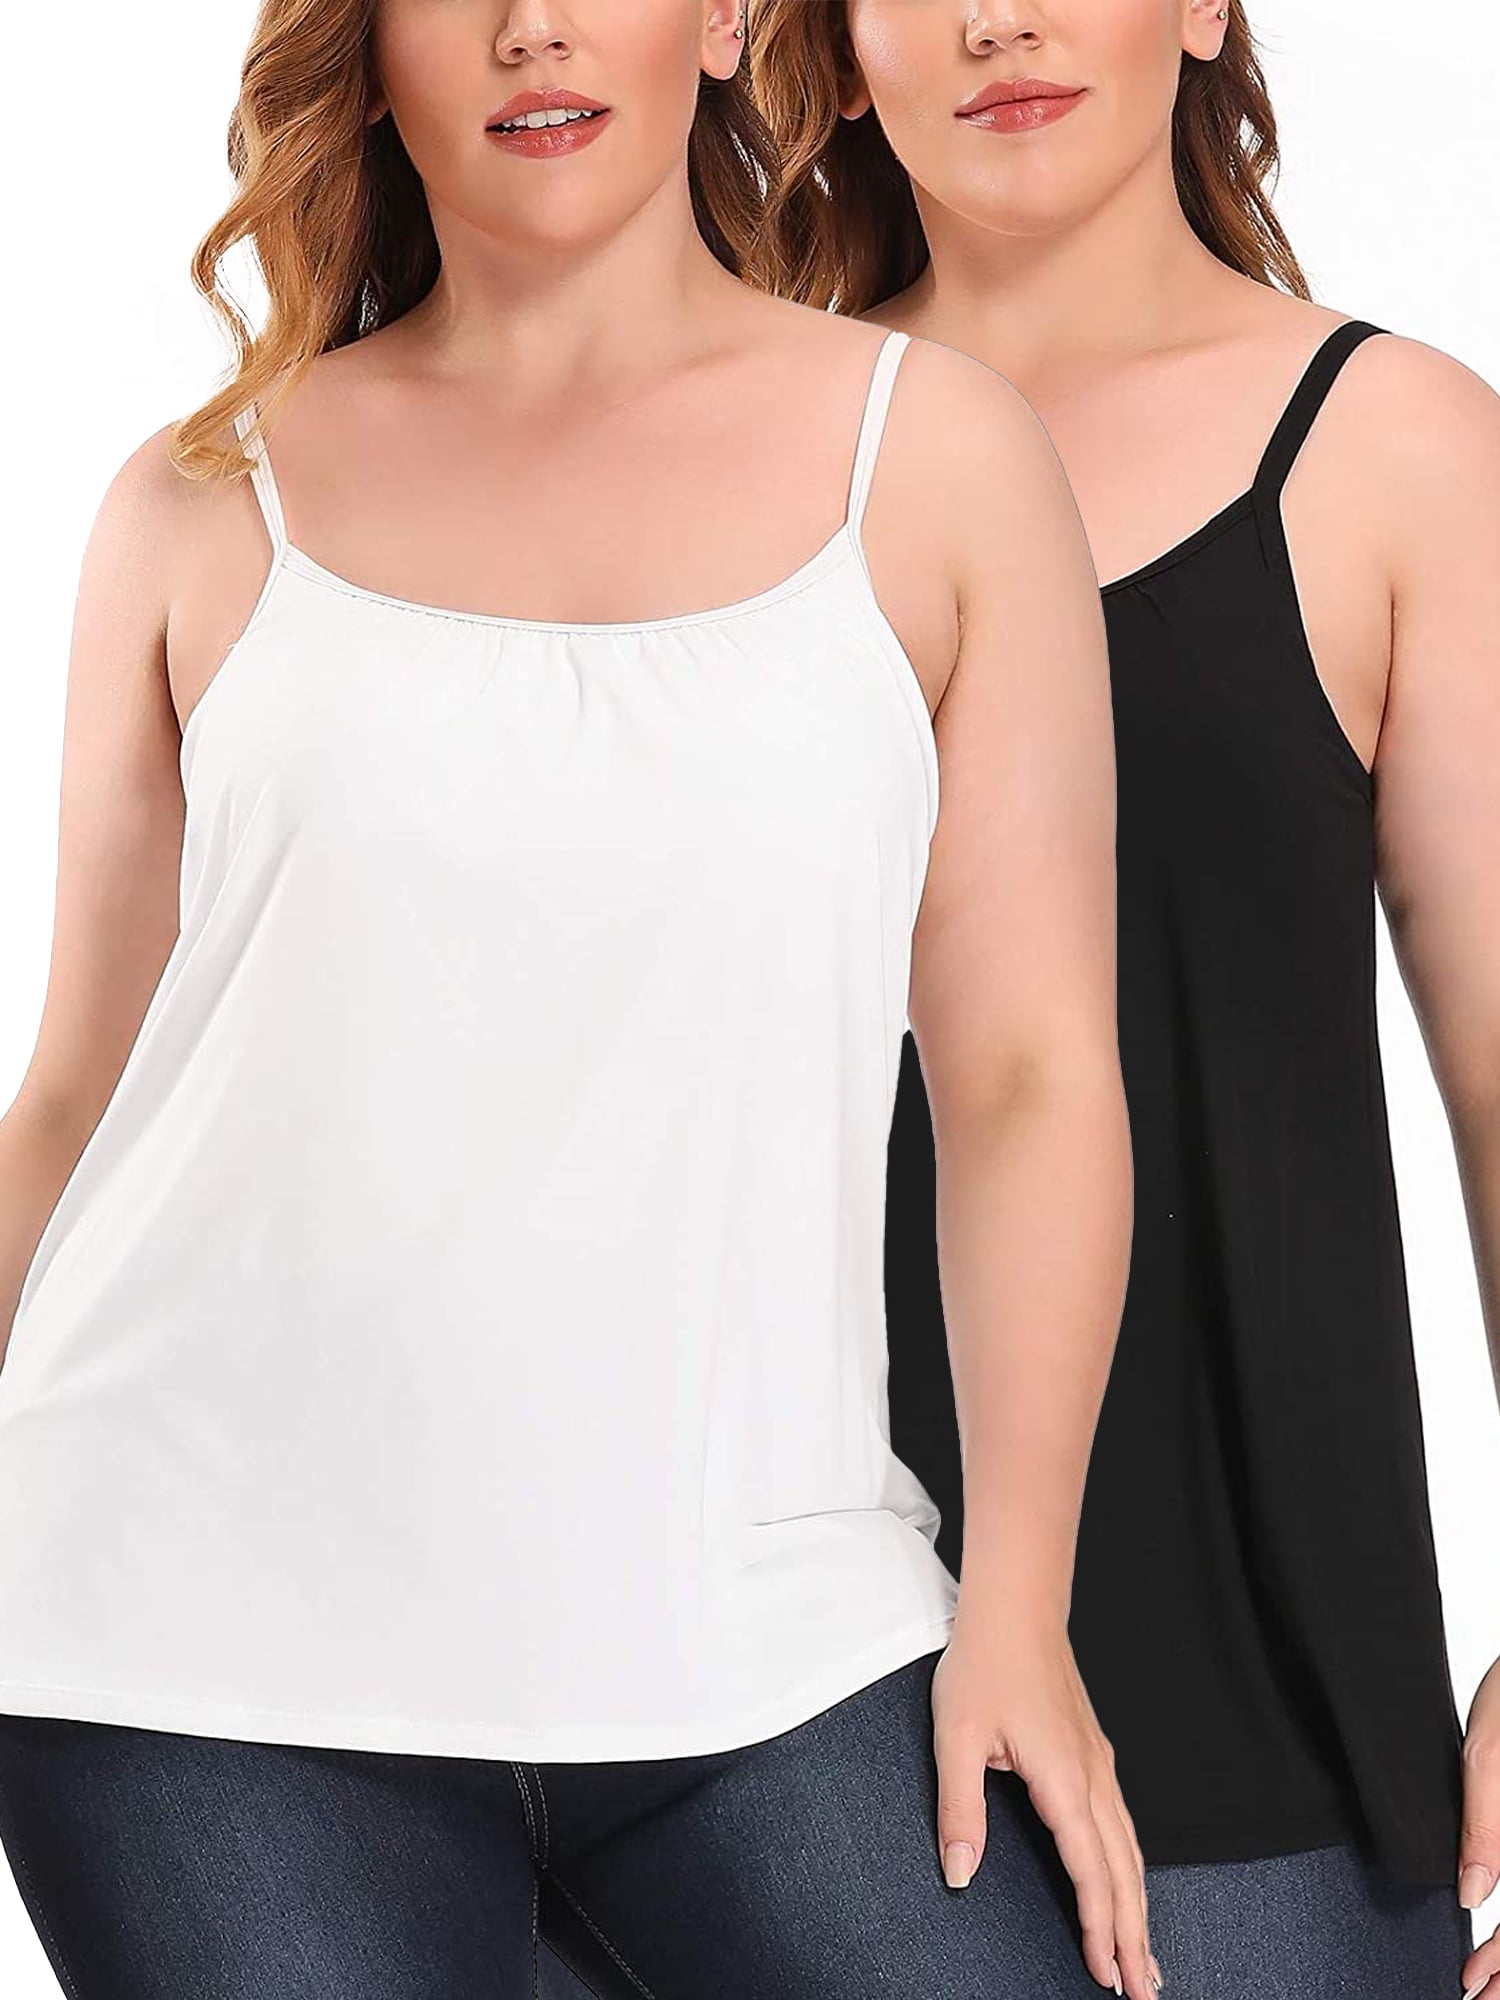 Women Built in Bra Camisole Vest Tank Tops Loose Fit Blouse Casual